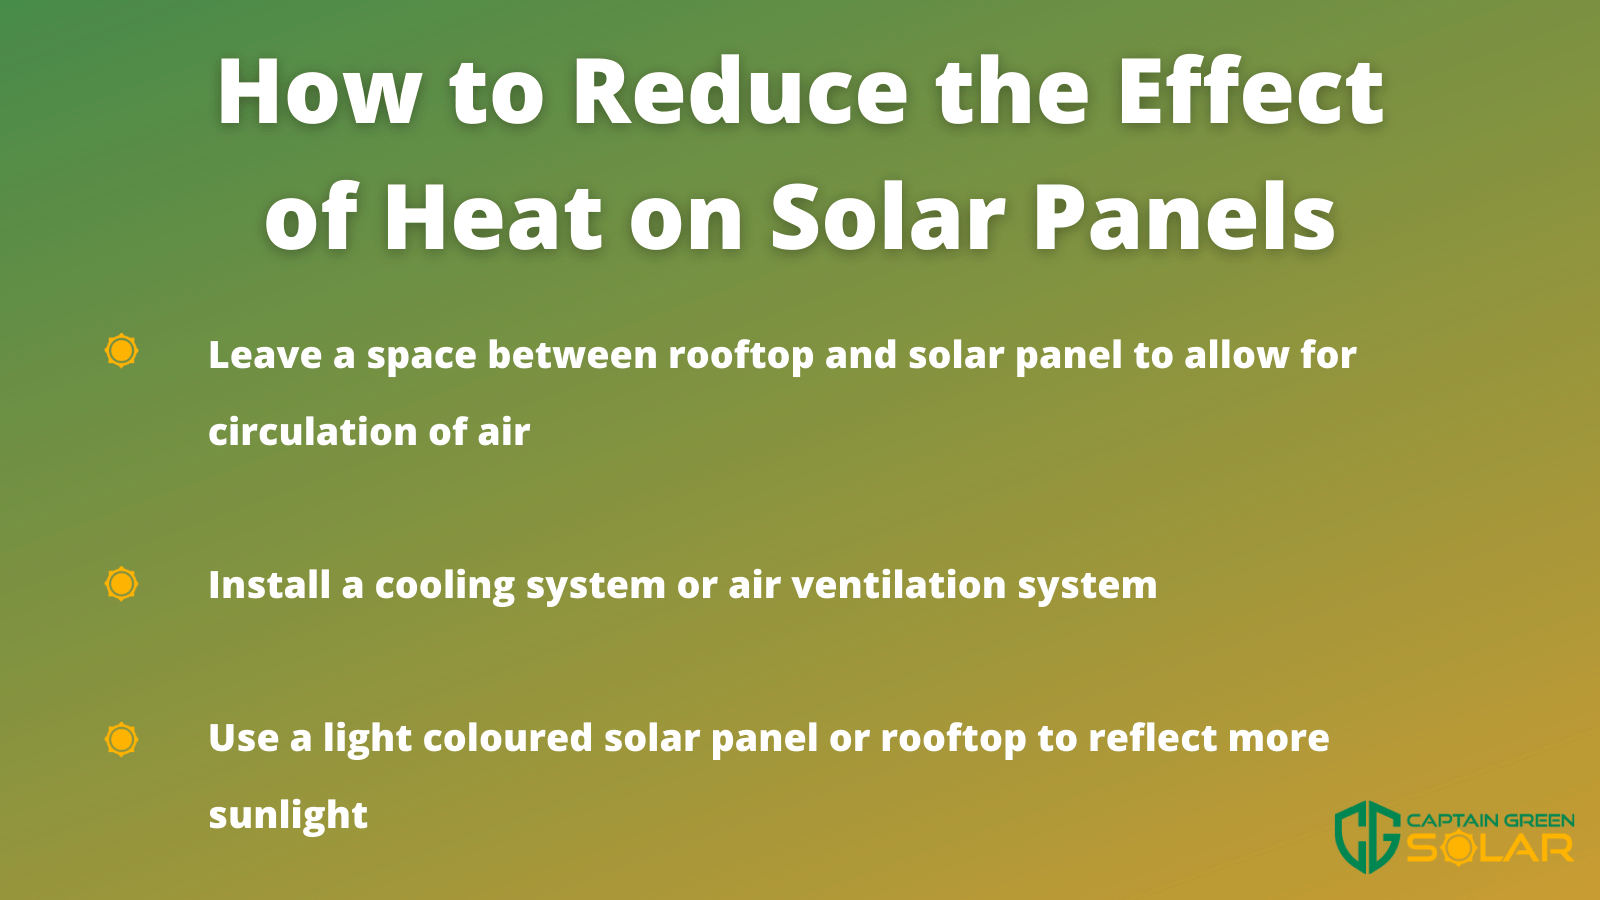 ways to reduce impacts of heat on solar